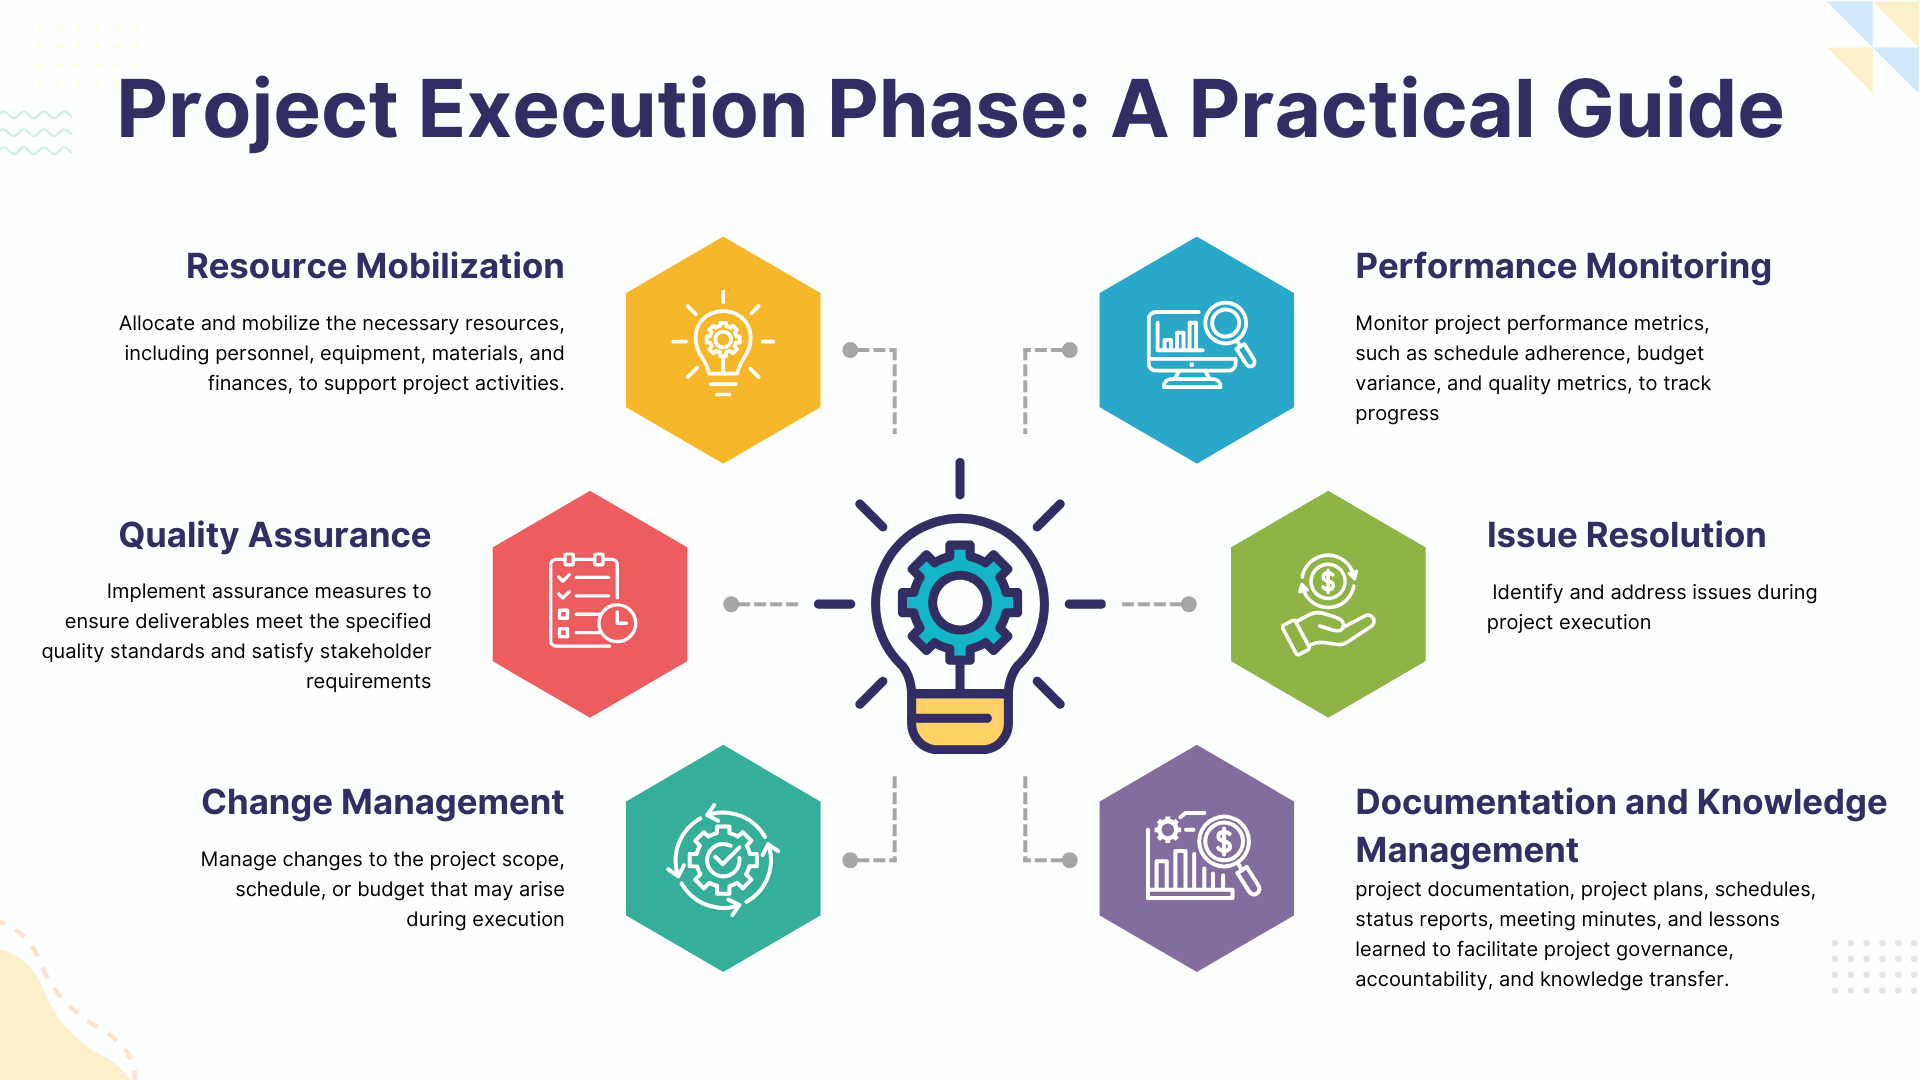 Project Execution Phase: A Practical Guide